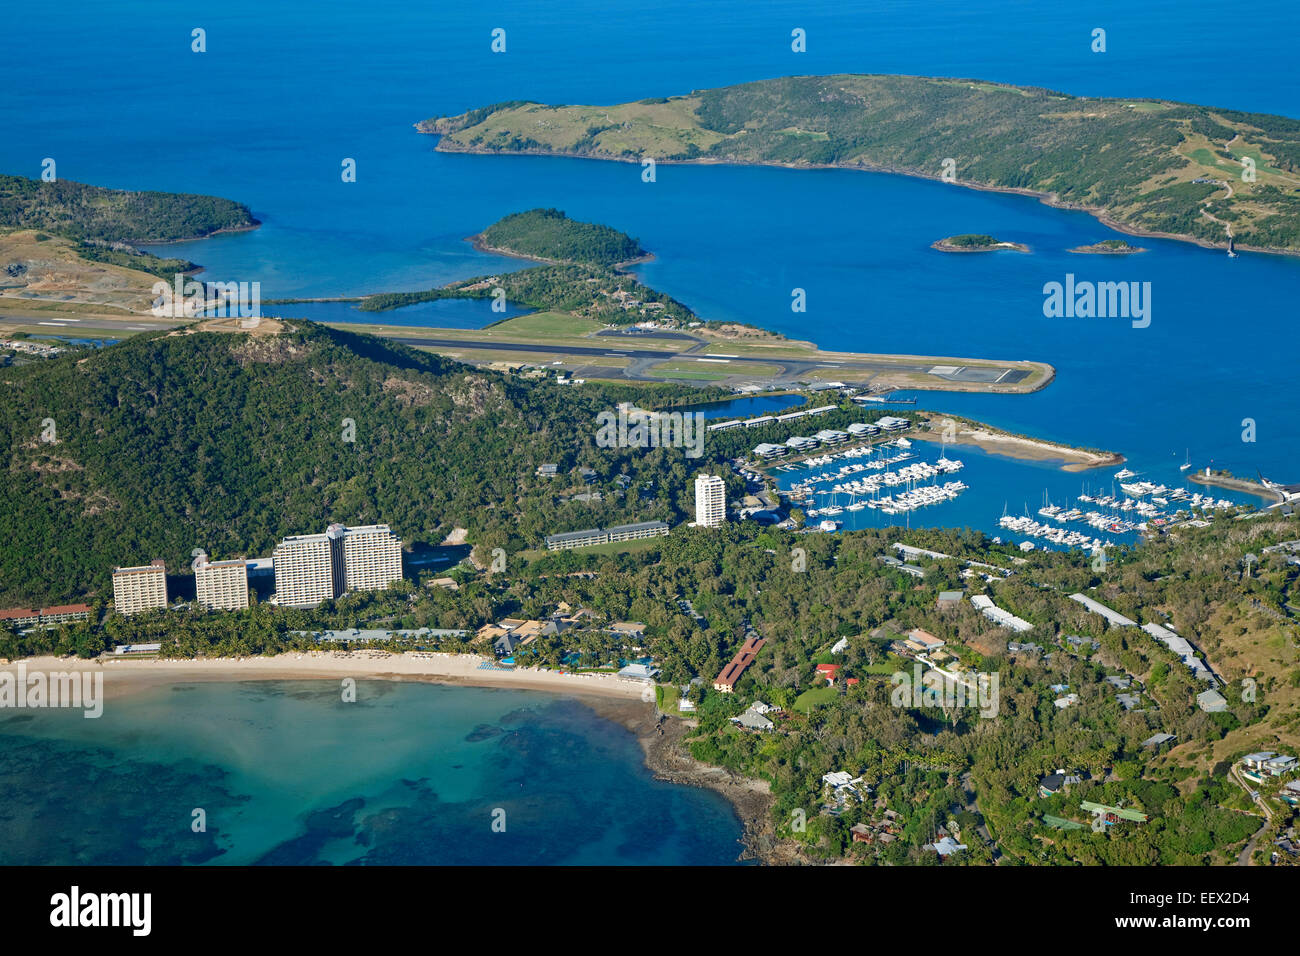 Areal view over marina, beaches and Great Barrier Reef Airport / Hamilton Island Airport in the Coral Sea, Queensland, Australia Stock Photo